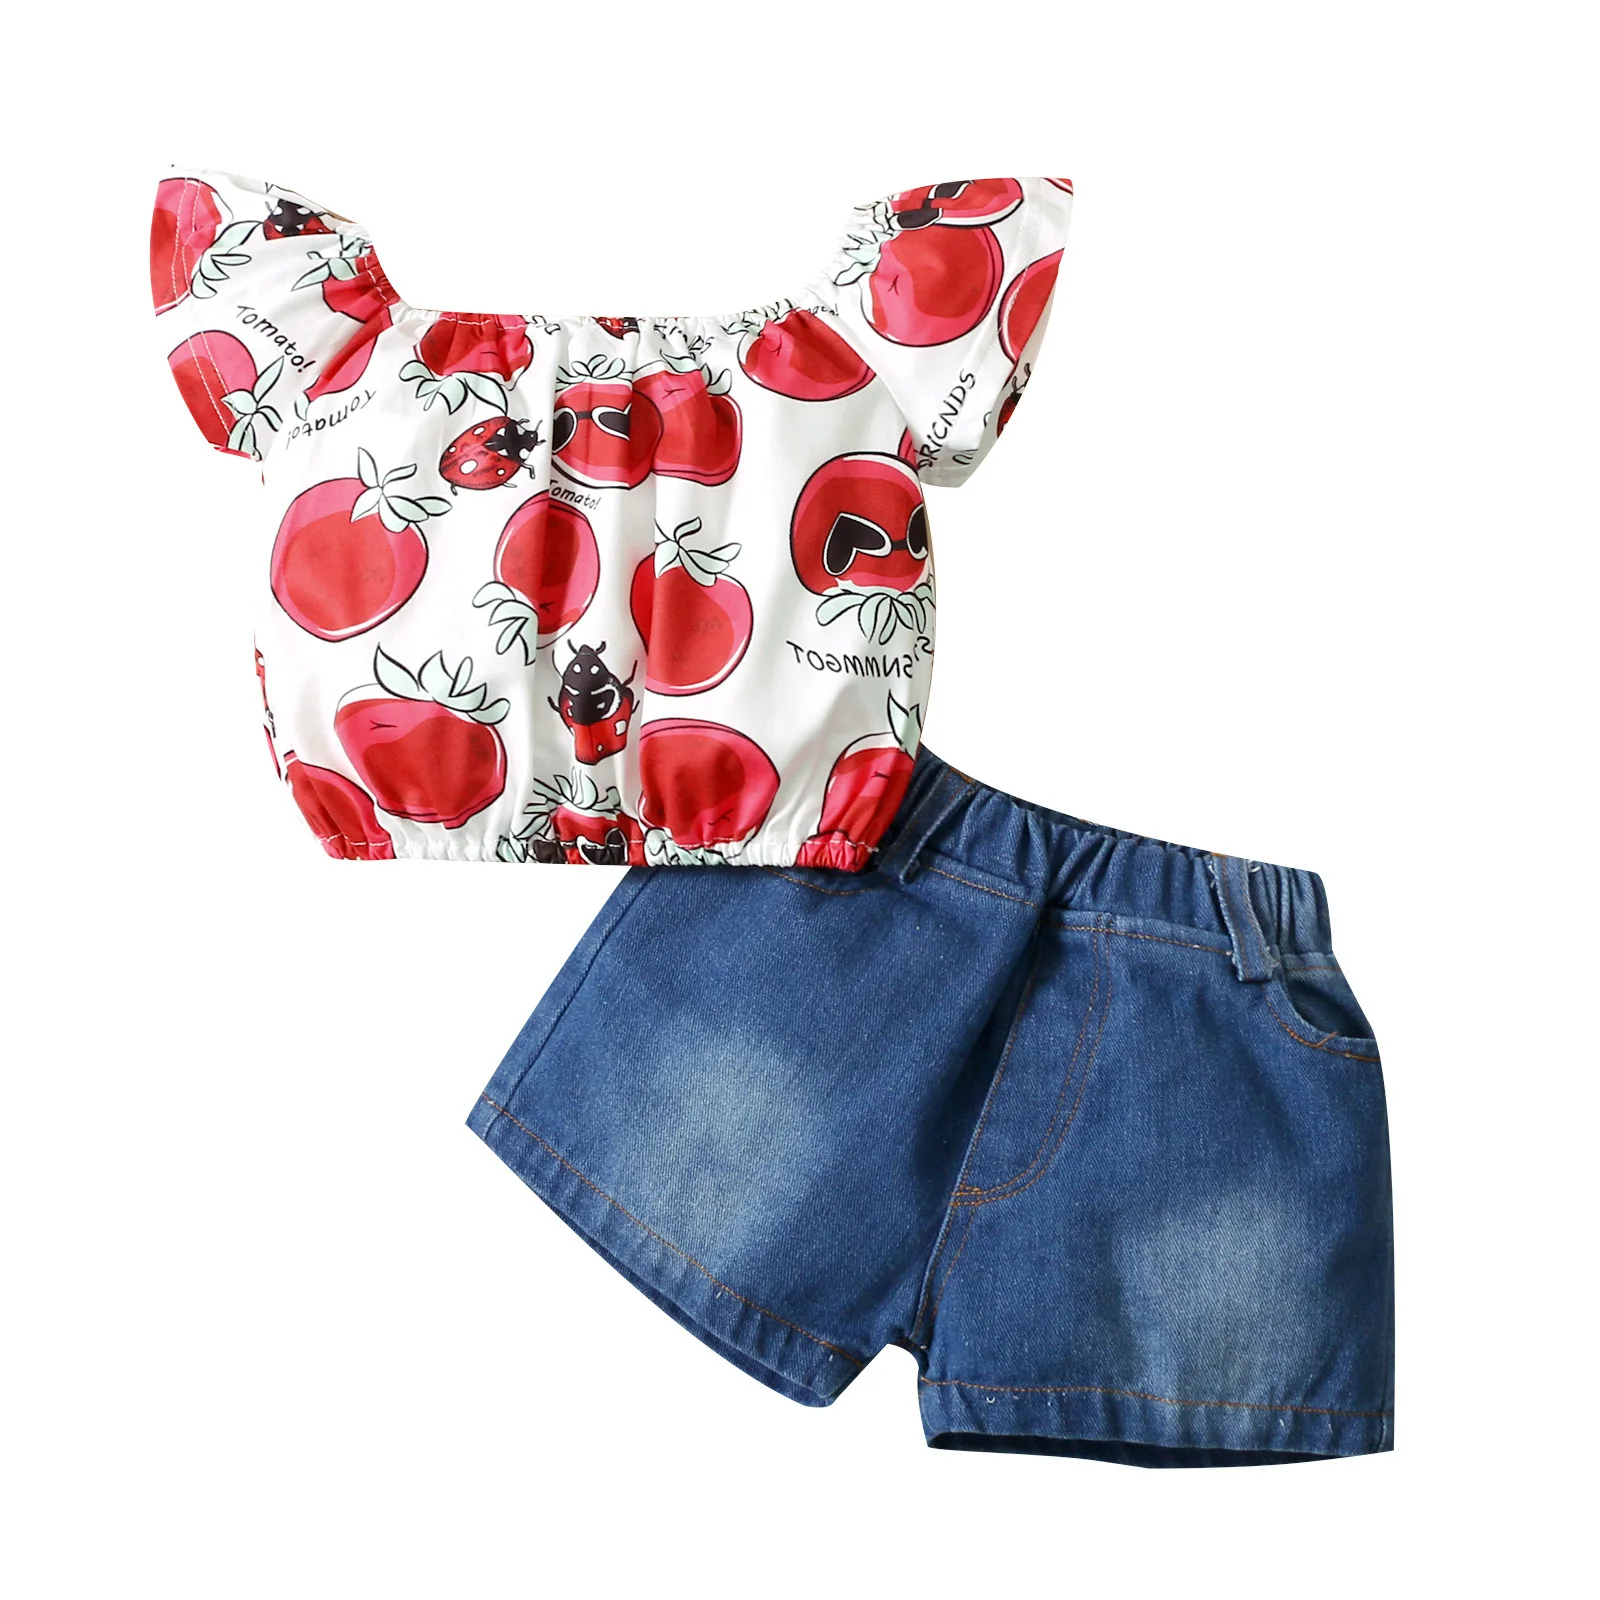 

OPPERIAYA 2Pieces Kids Summer Cotton Casual Set Cherry Print Boat Neck Short Sleeve Tops Denim Shorts for Toddler 3-24 Months